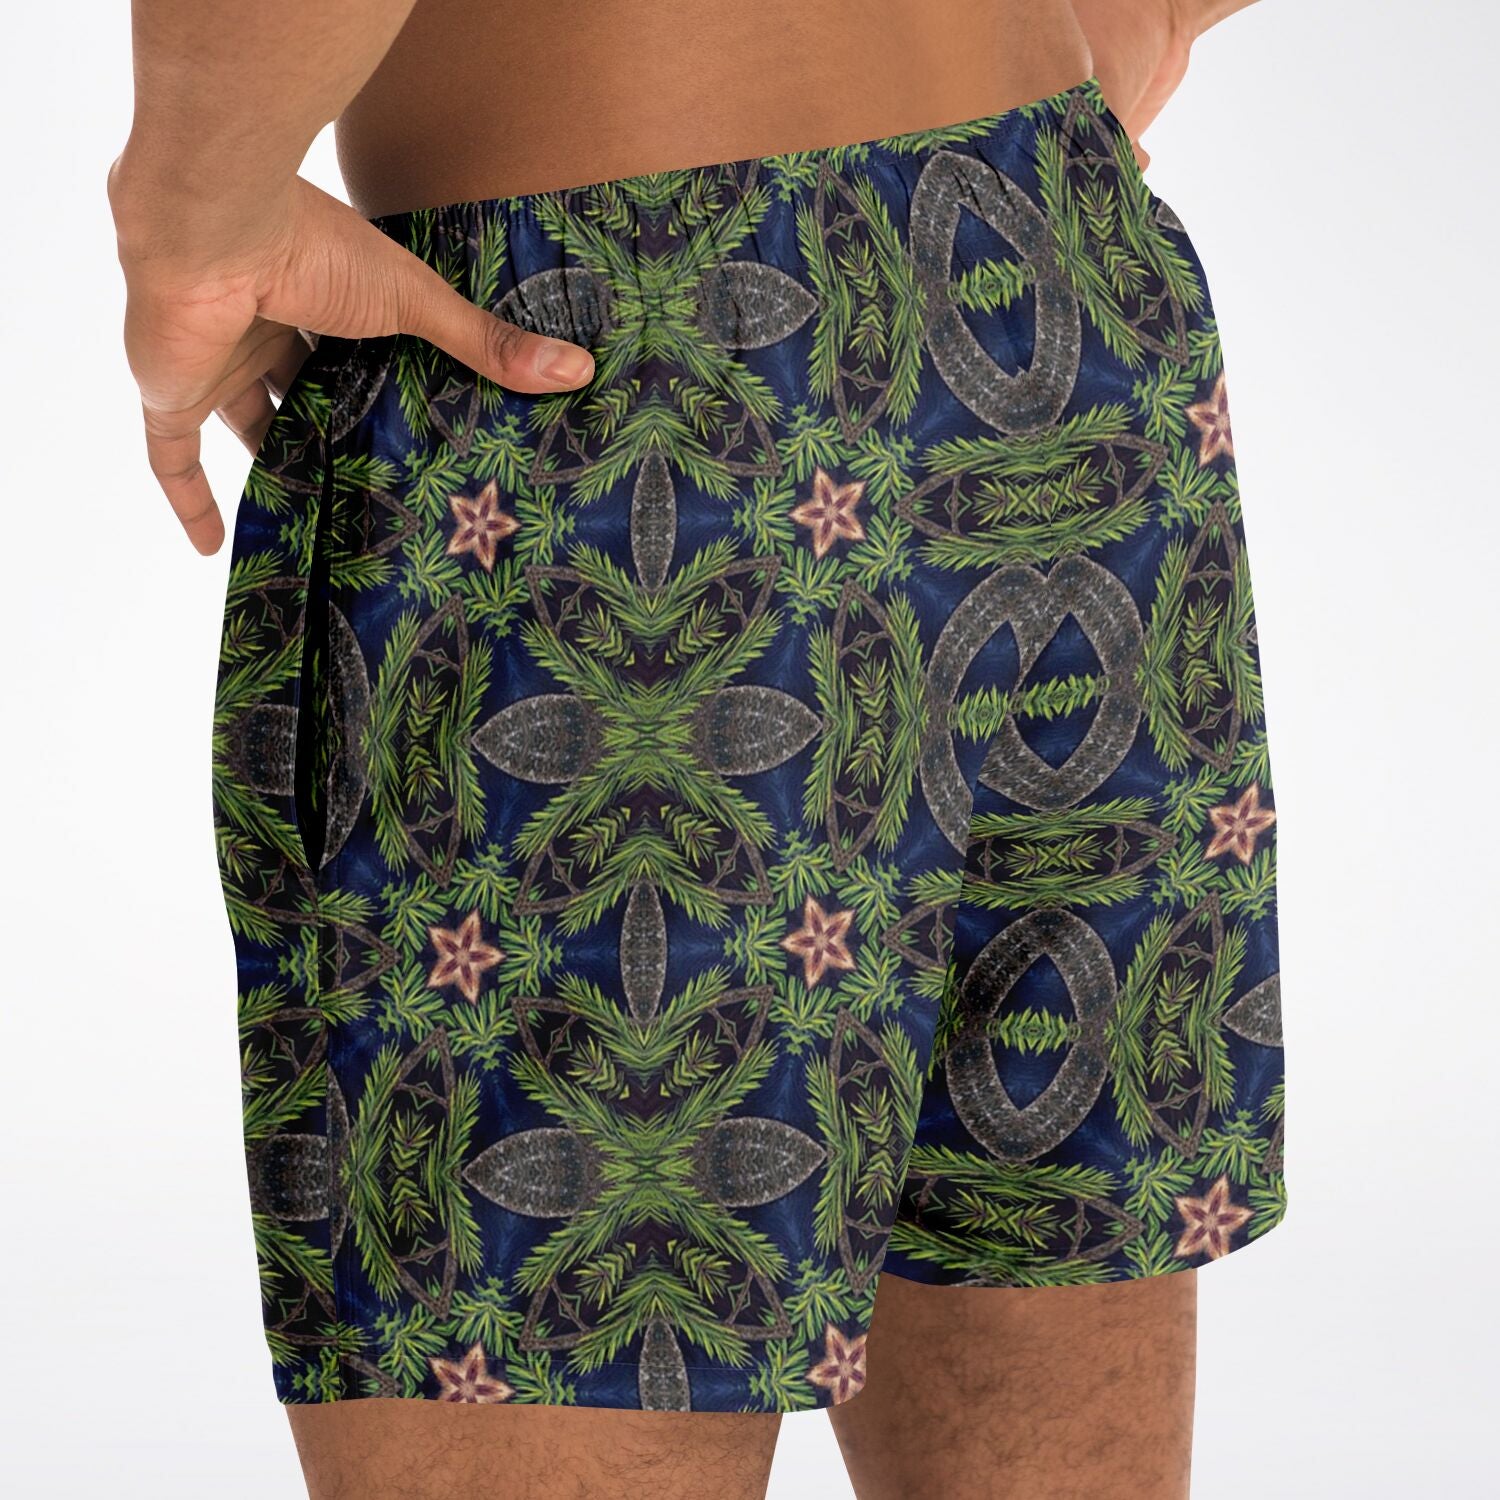 swim shorts in black for men printed with the forester design